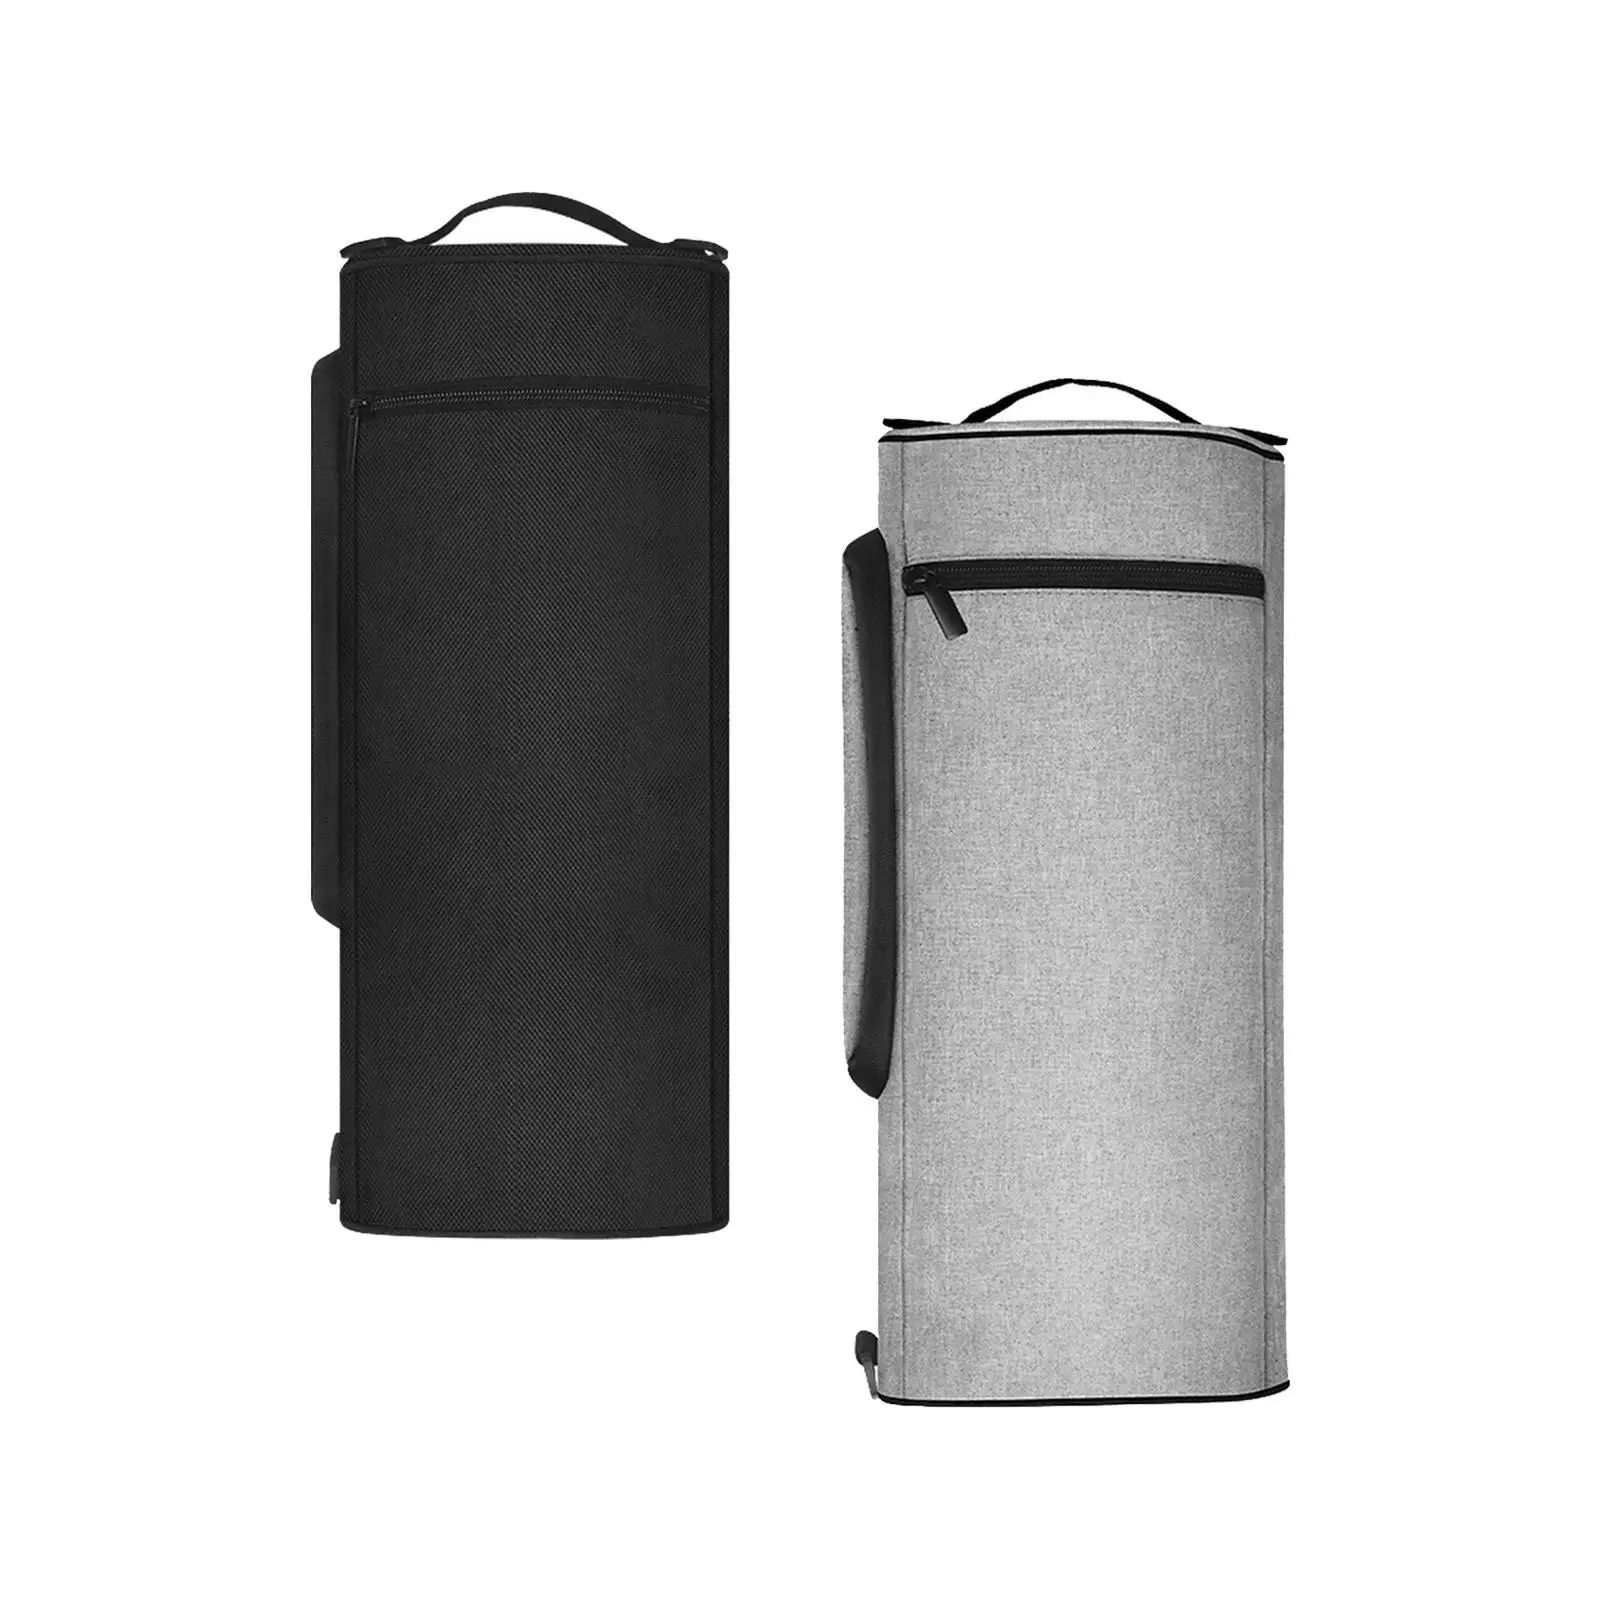 Oxford Cloth Golf Coolers Bag Insulated Coolers Sleeve Beer Sleeve Insulated Coolers Bag for Camping